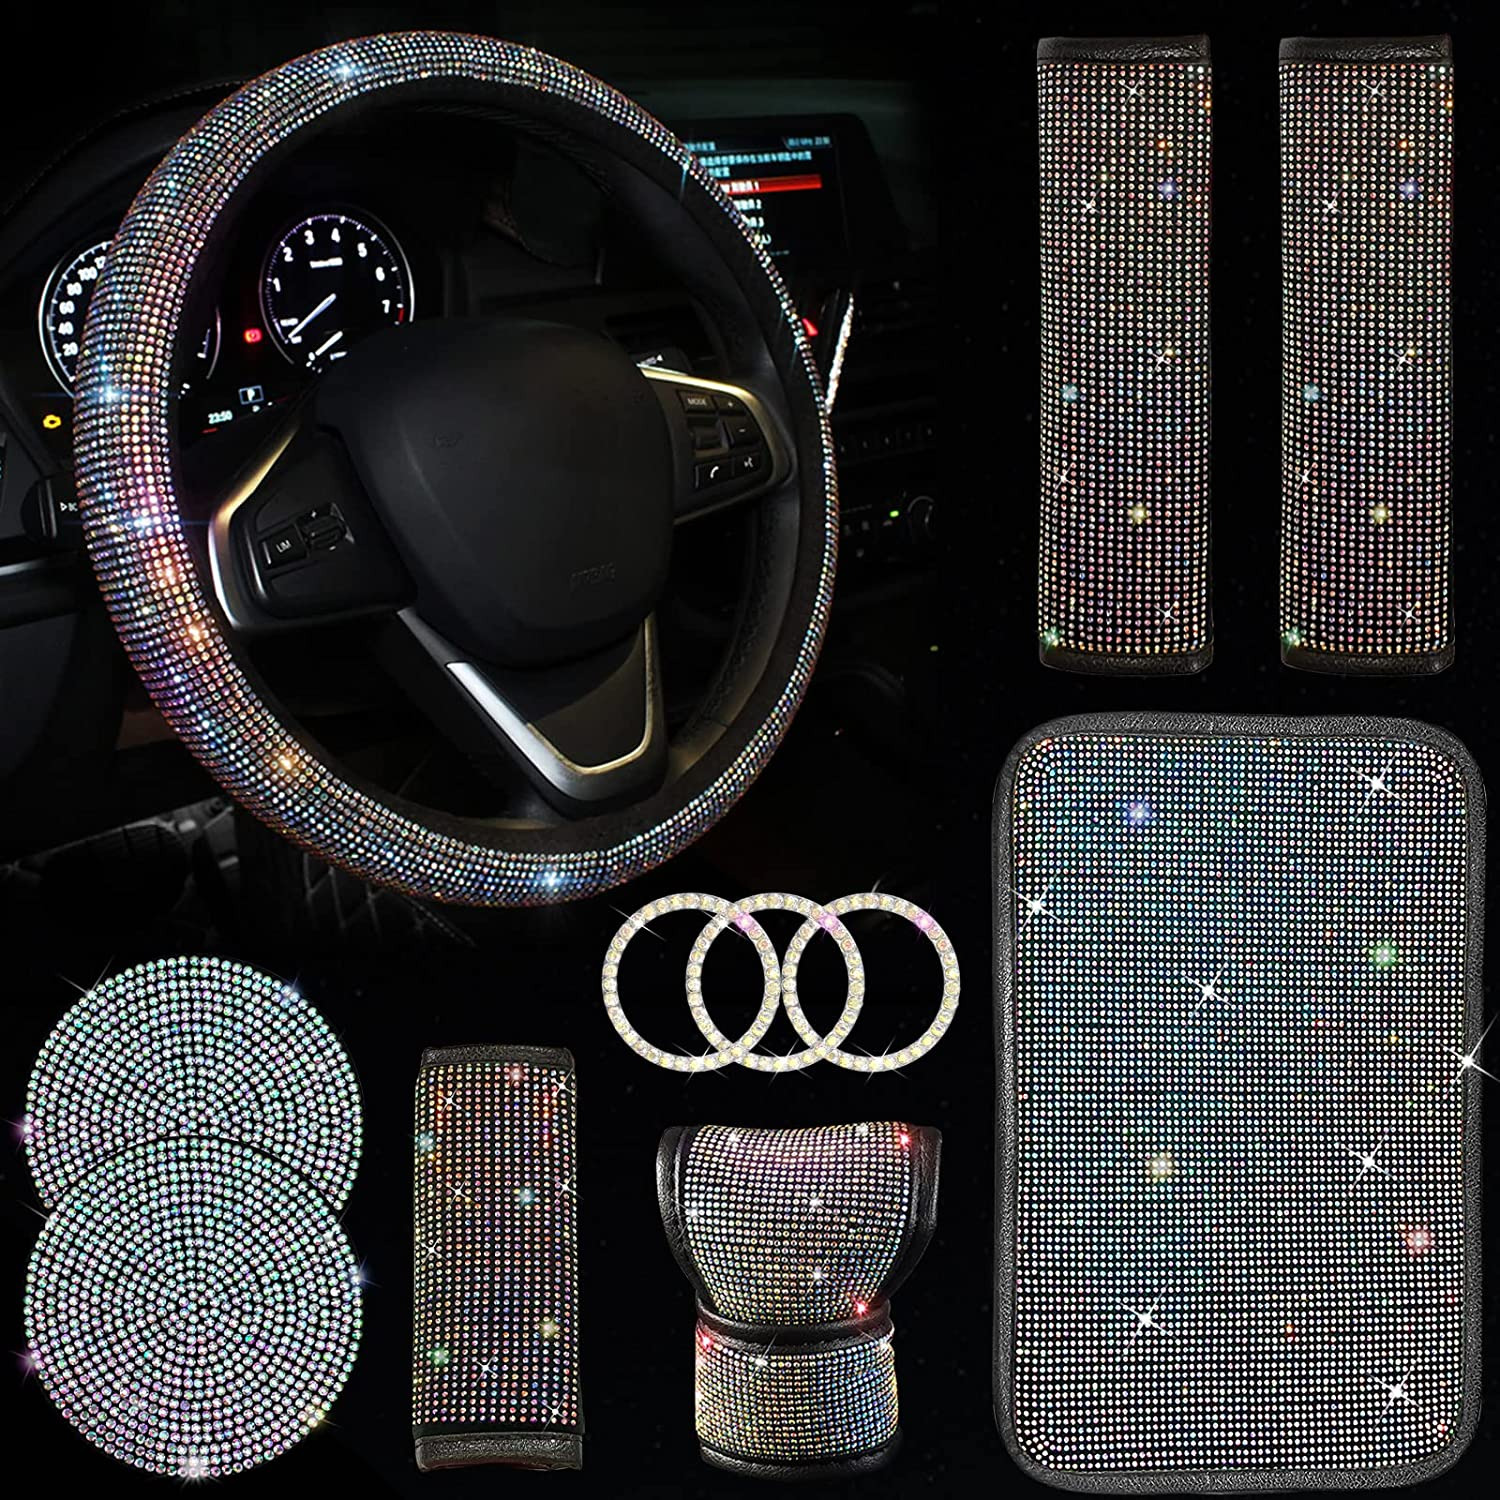 11 Pcs Bling Car Accessories Set,Bling Car Accessories Set for Women, Bling Stee